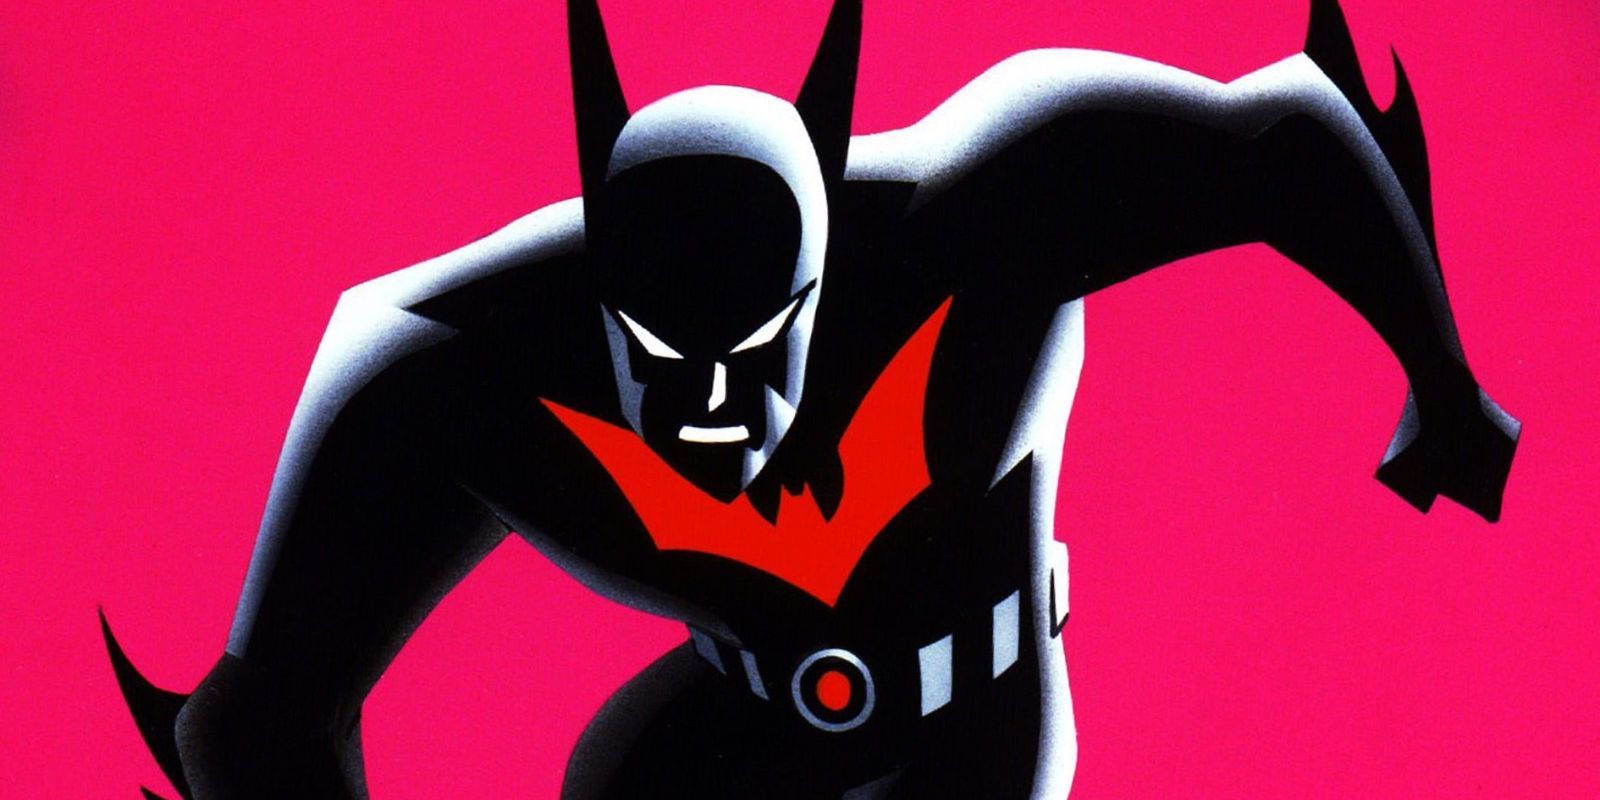 Terry McGinnis in action as Batman in promo art for Batman Beyond.